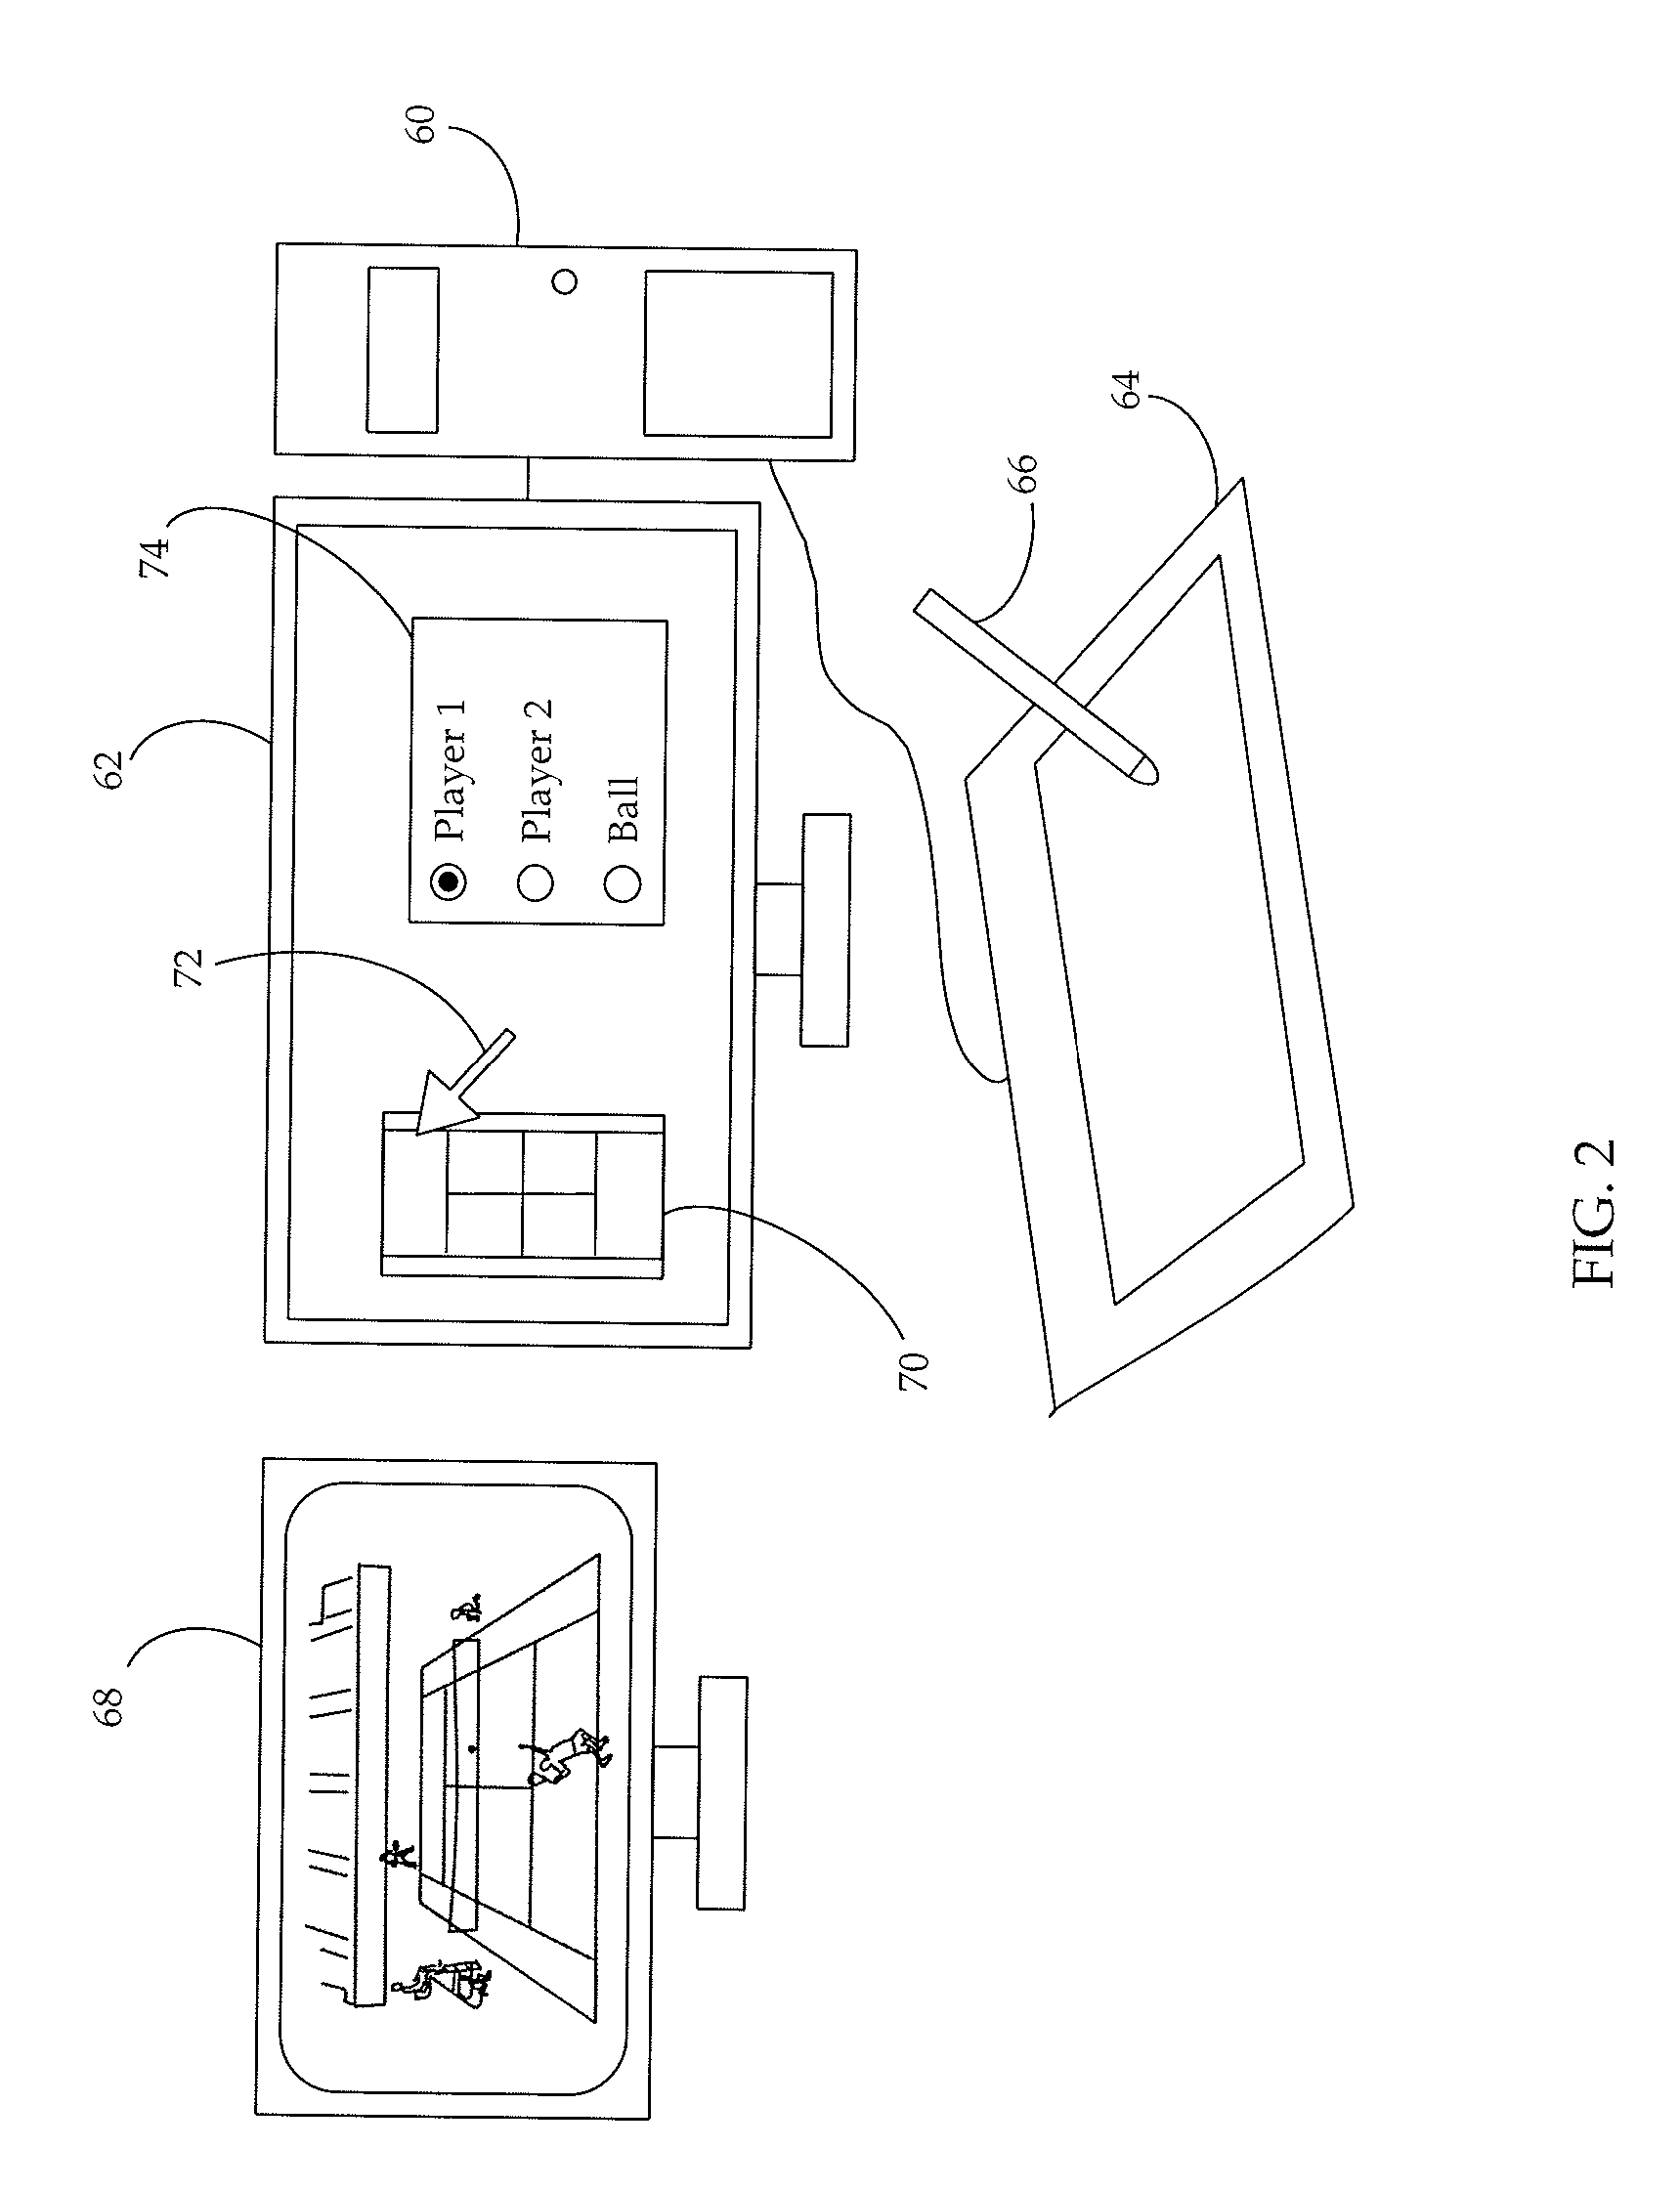 Encoding and distribution of game play through compact message encoding and graphical rendering